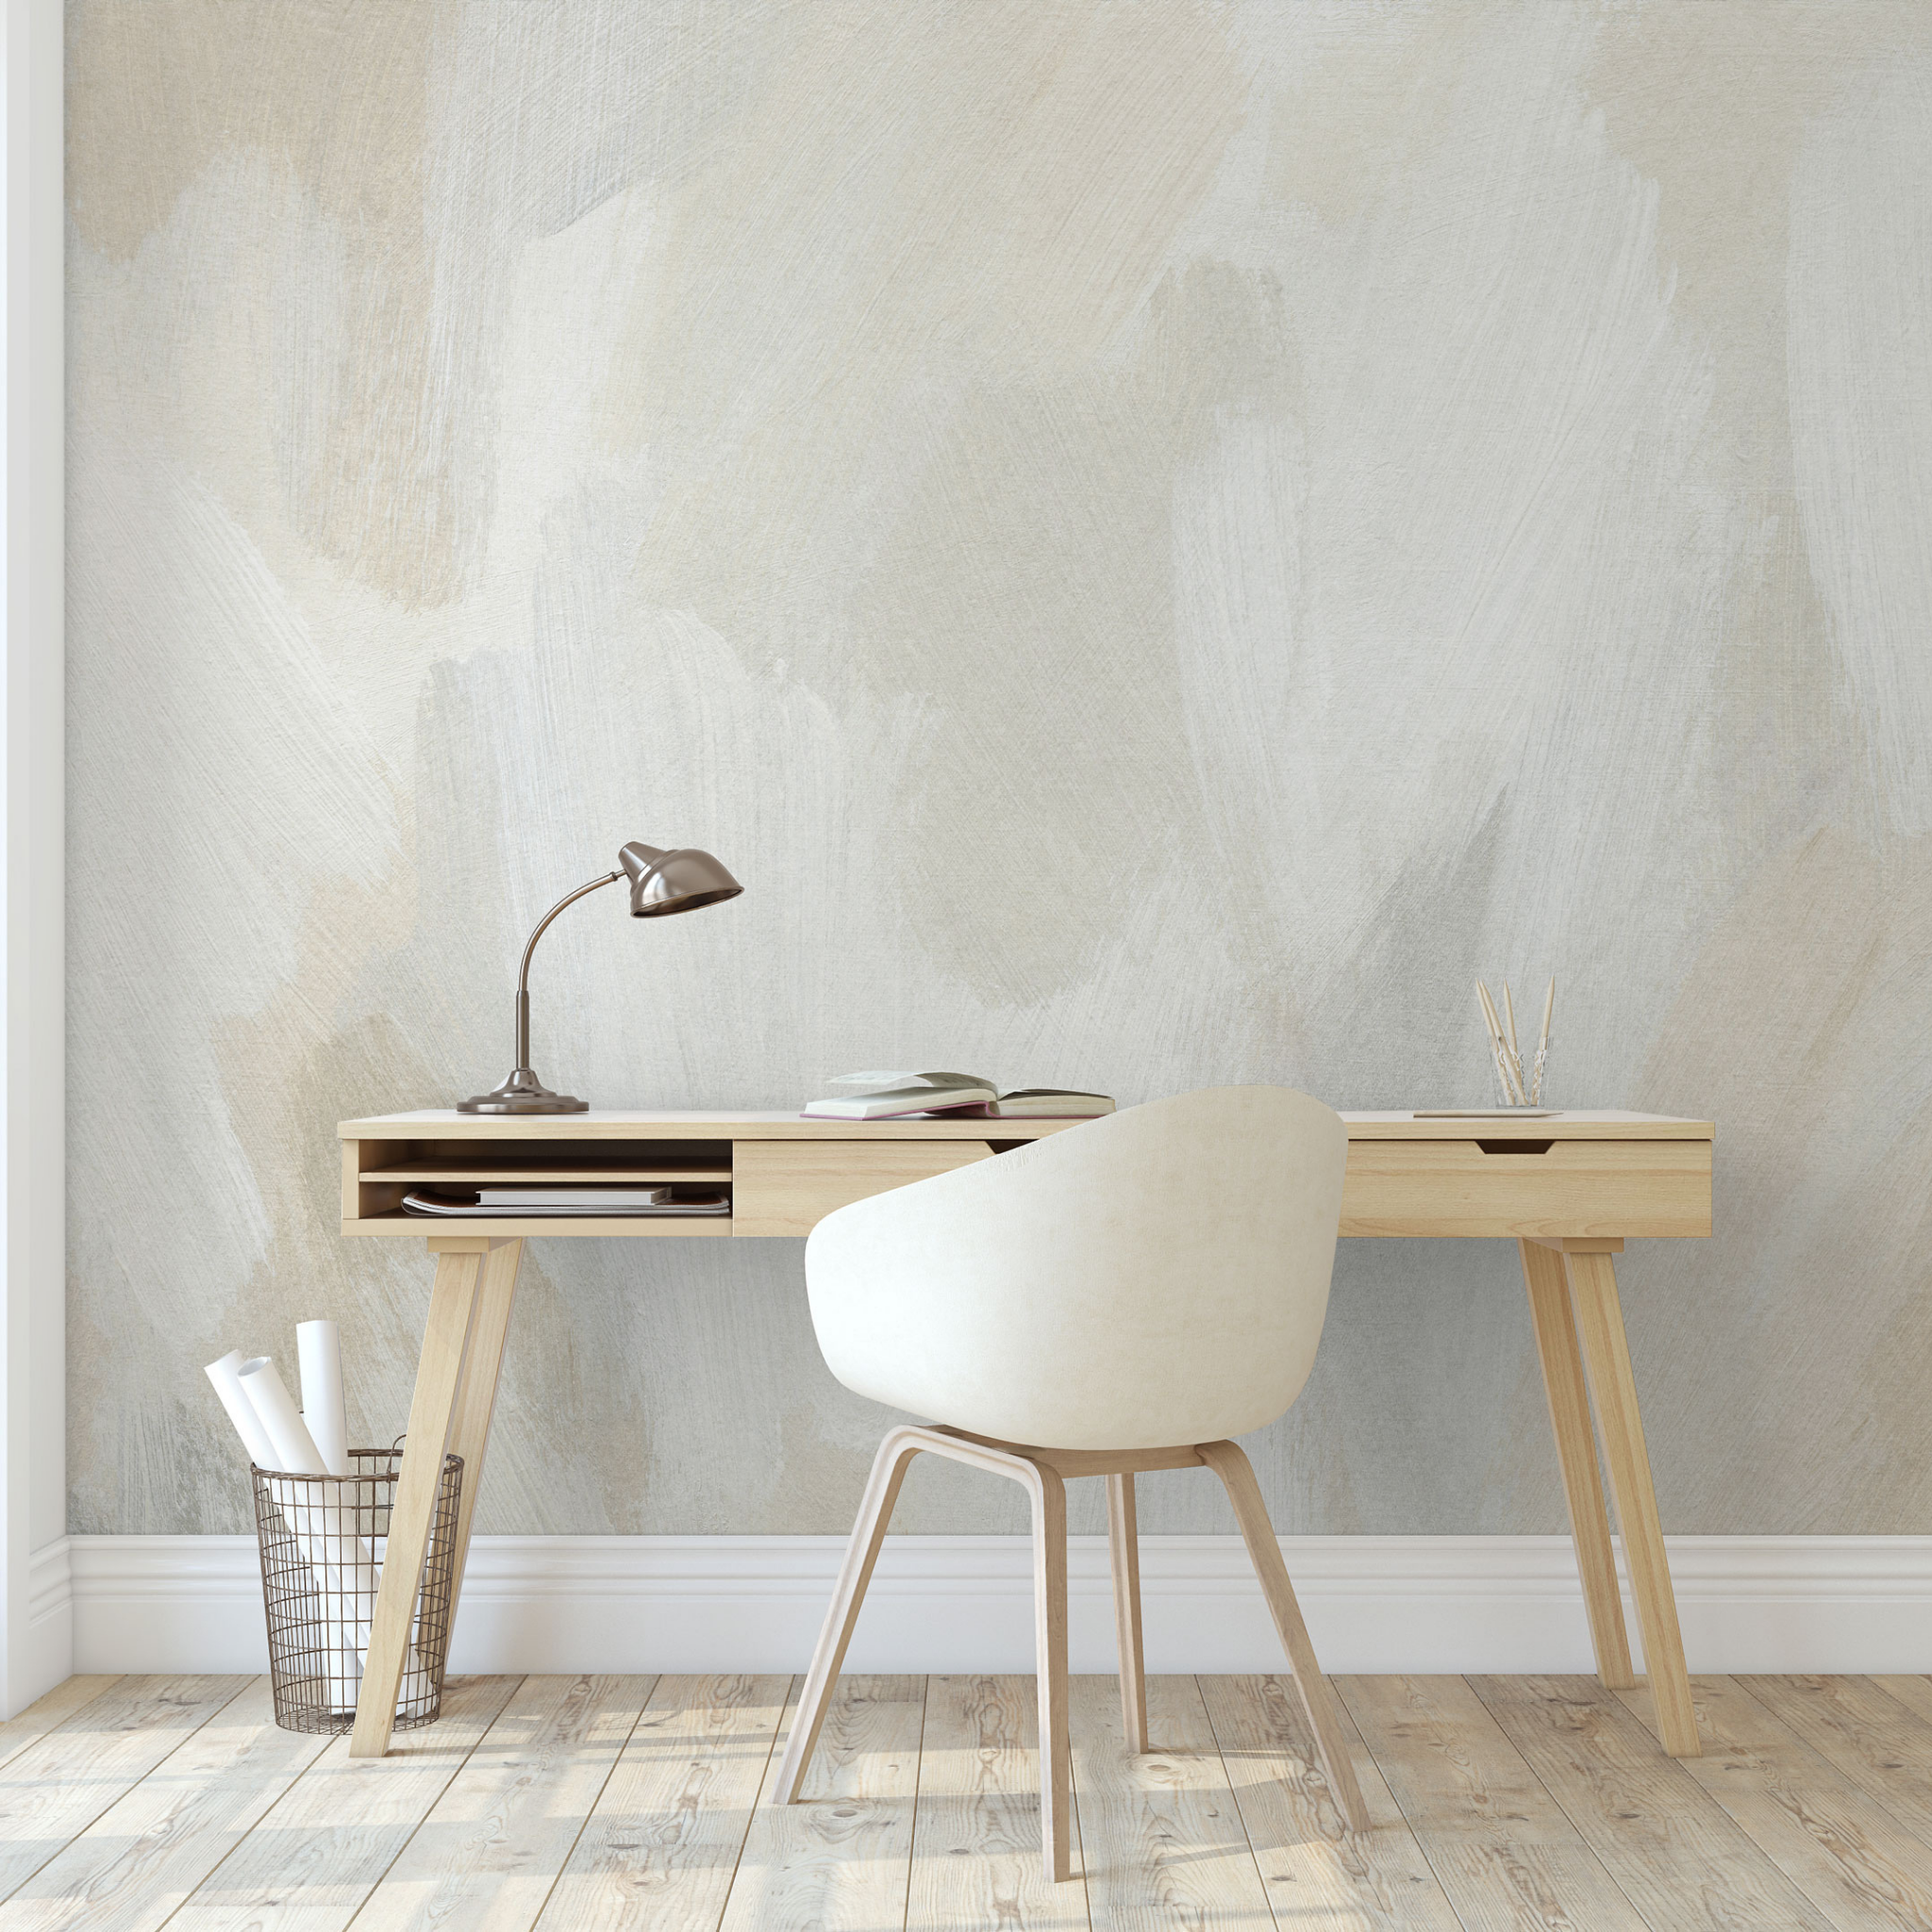 "Brietta Wallpaper by Wall Blush in a modern home office focusing on the textured wall covering."